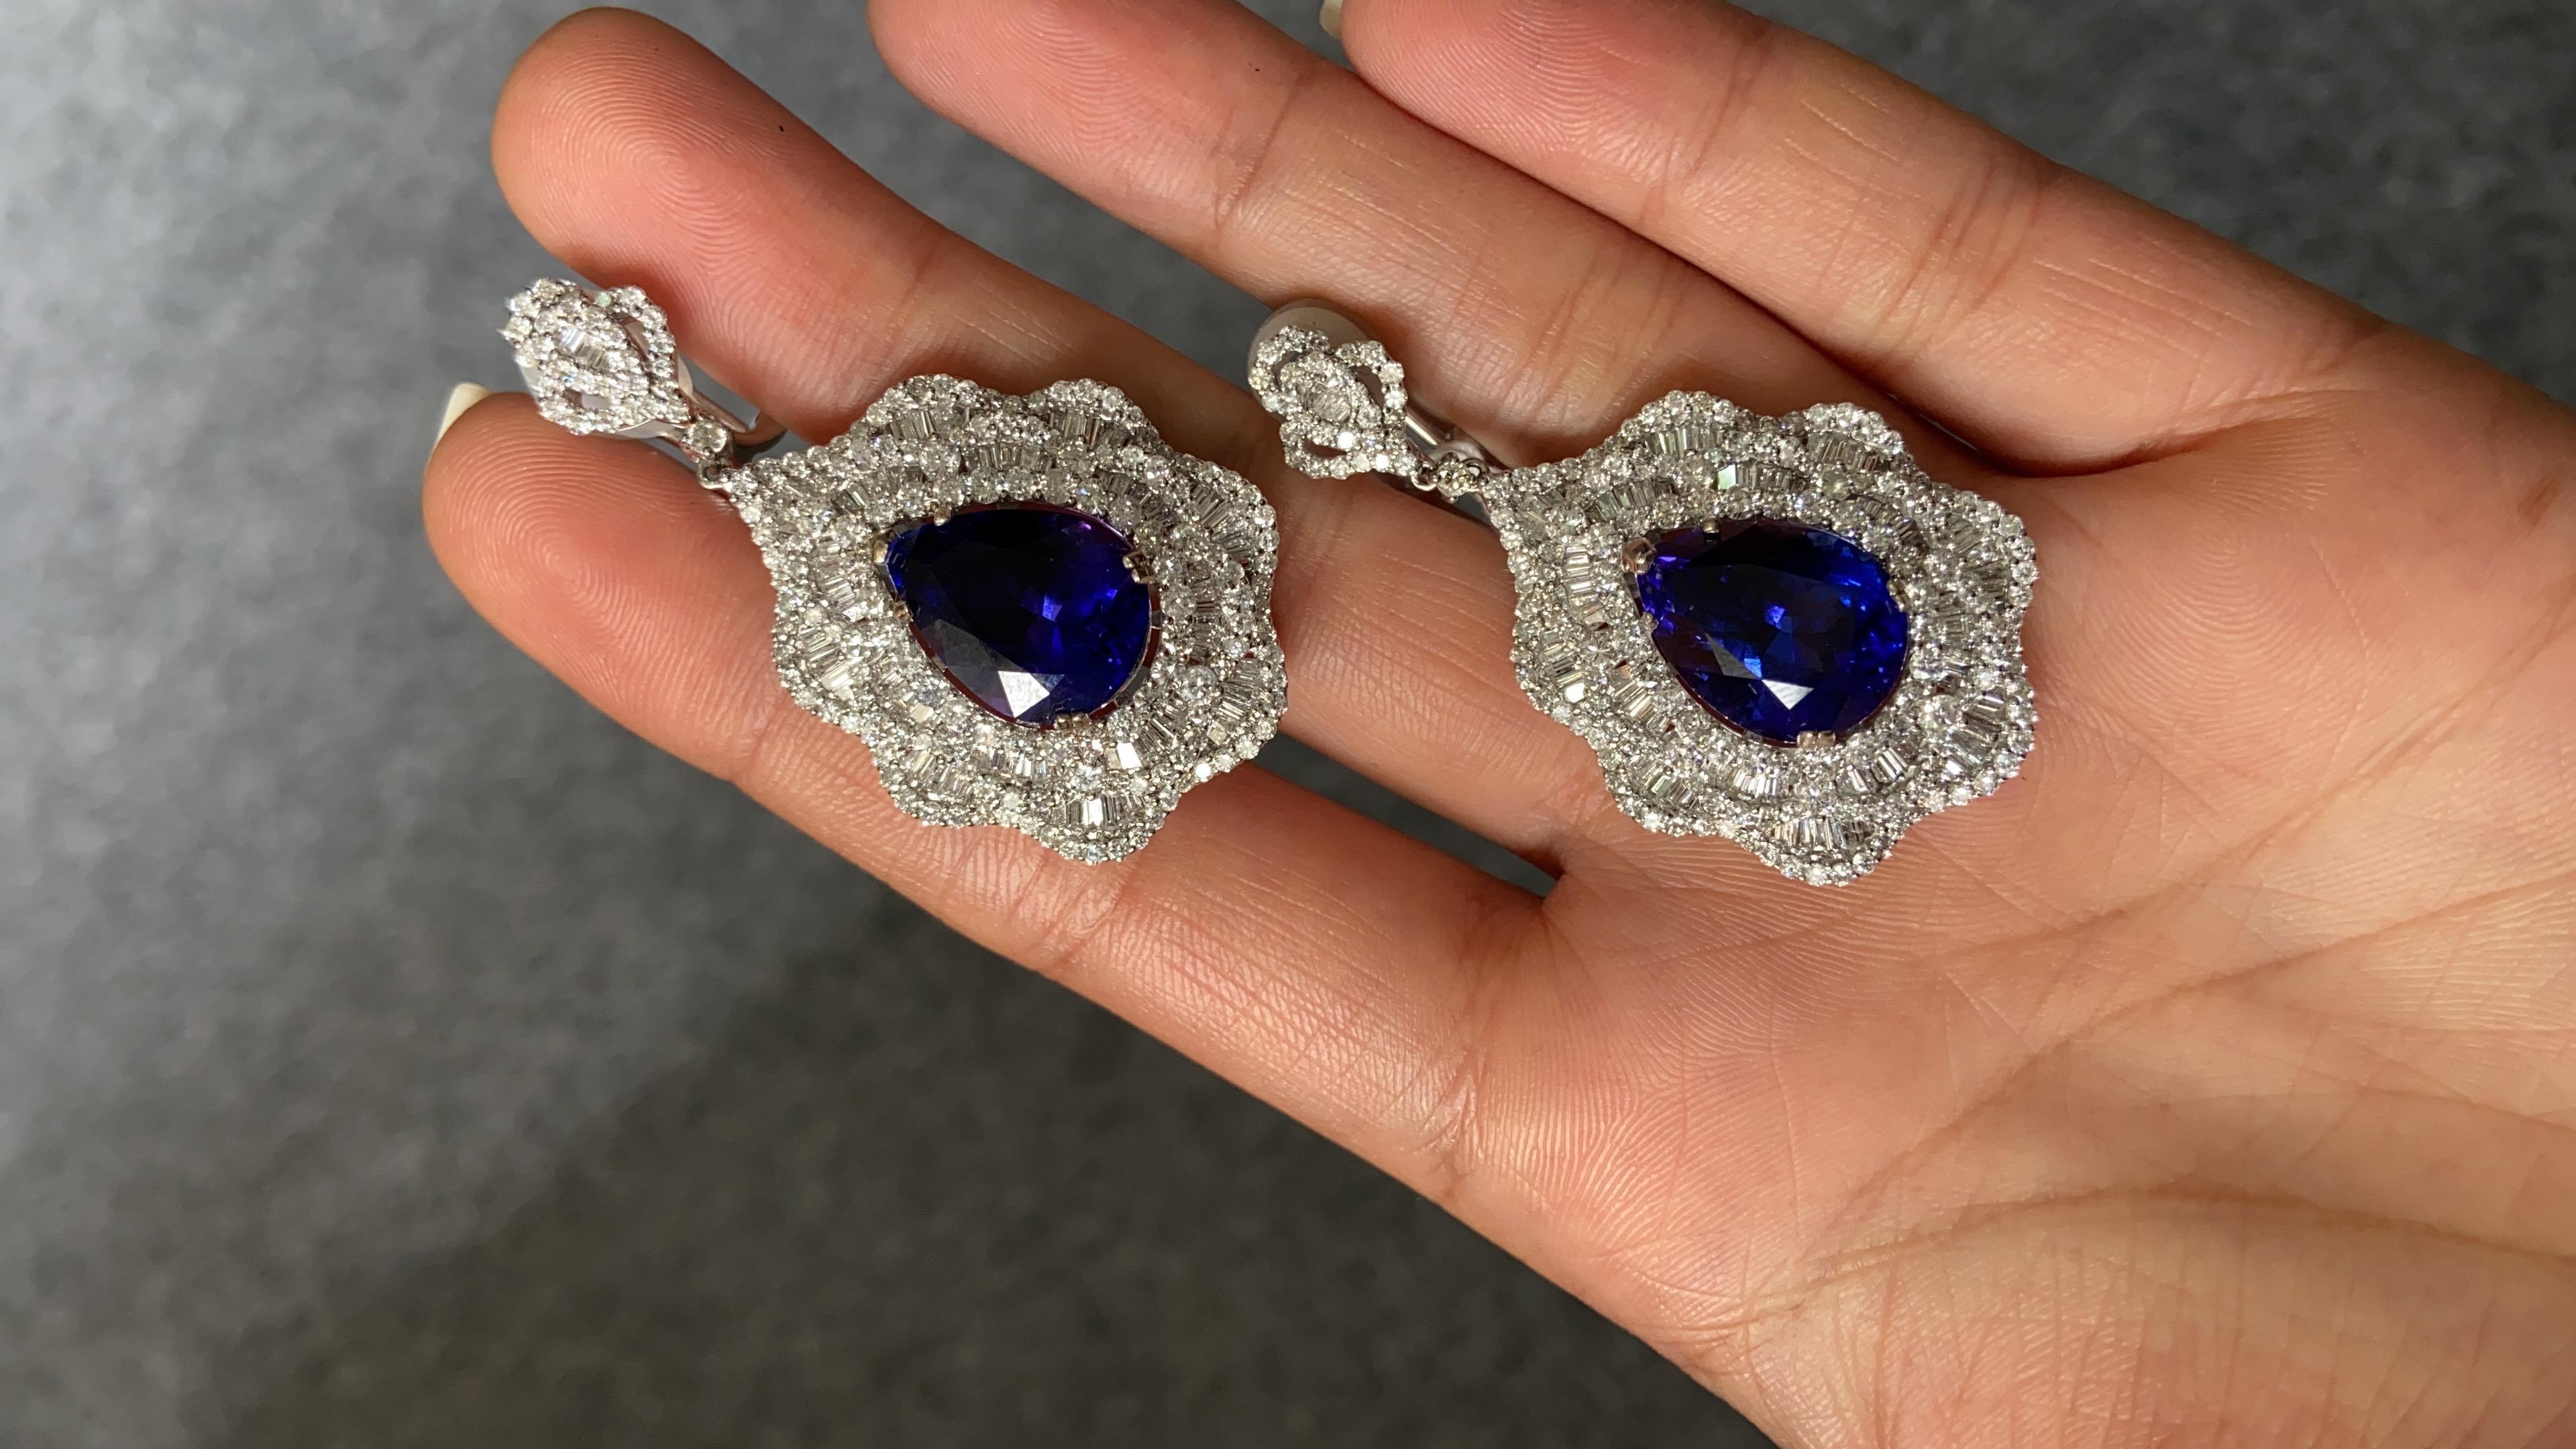 A stunning pair of 16.17 carat Tanzanite Earrings, of exceptional quality and colour. There are no inclusions in the natural stones. The custom cut, deep blue tanzanites are elegantly framed with round and bagguette diamond, set in solid 18K White